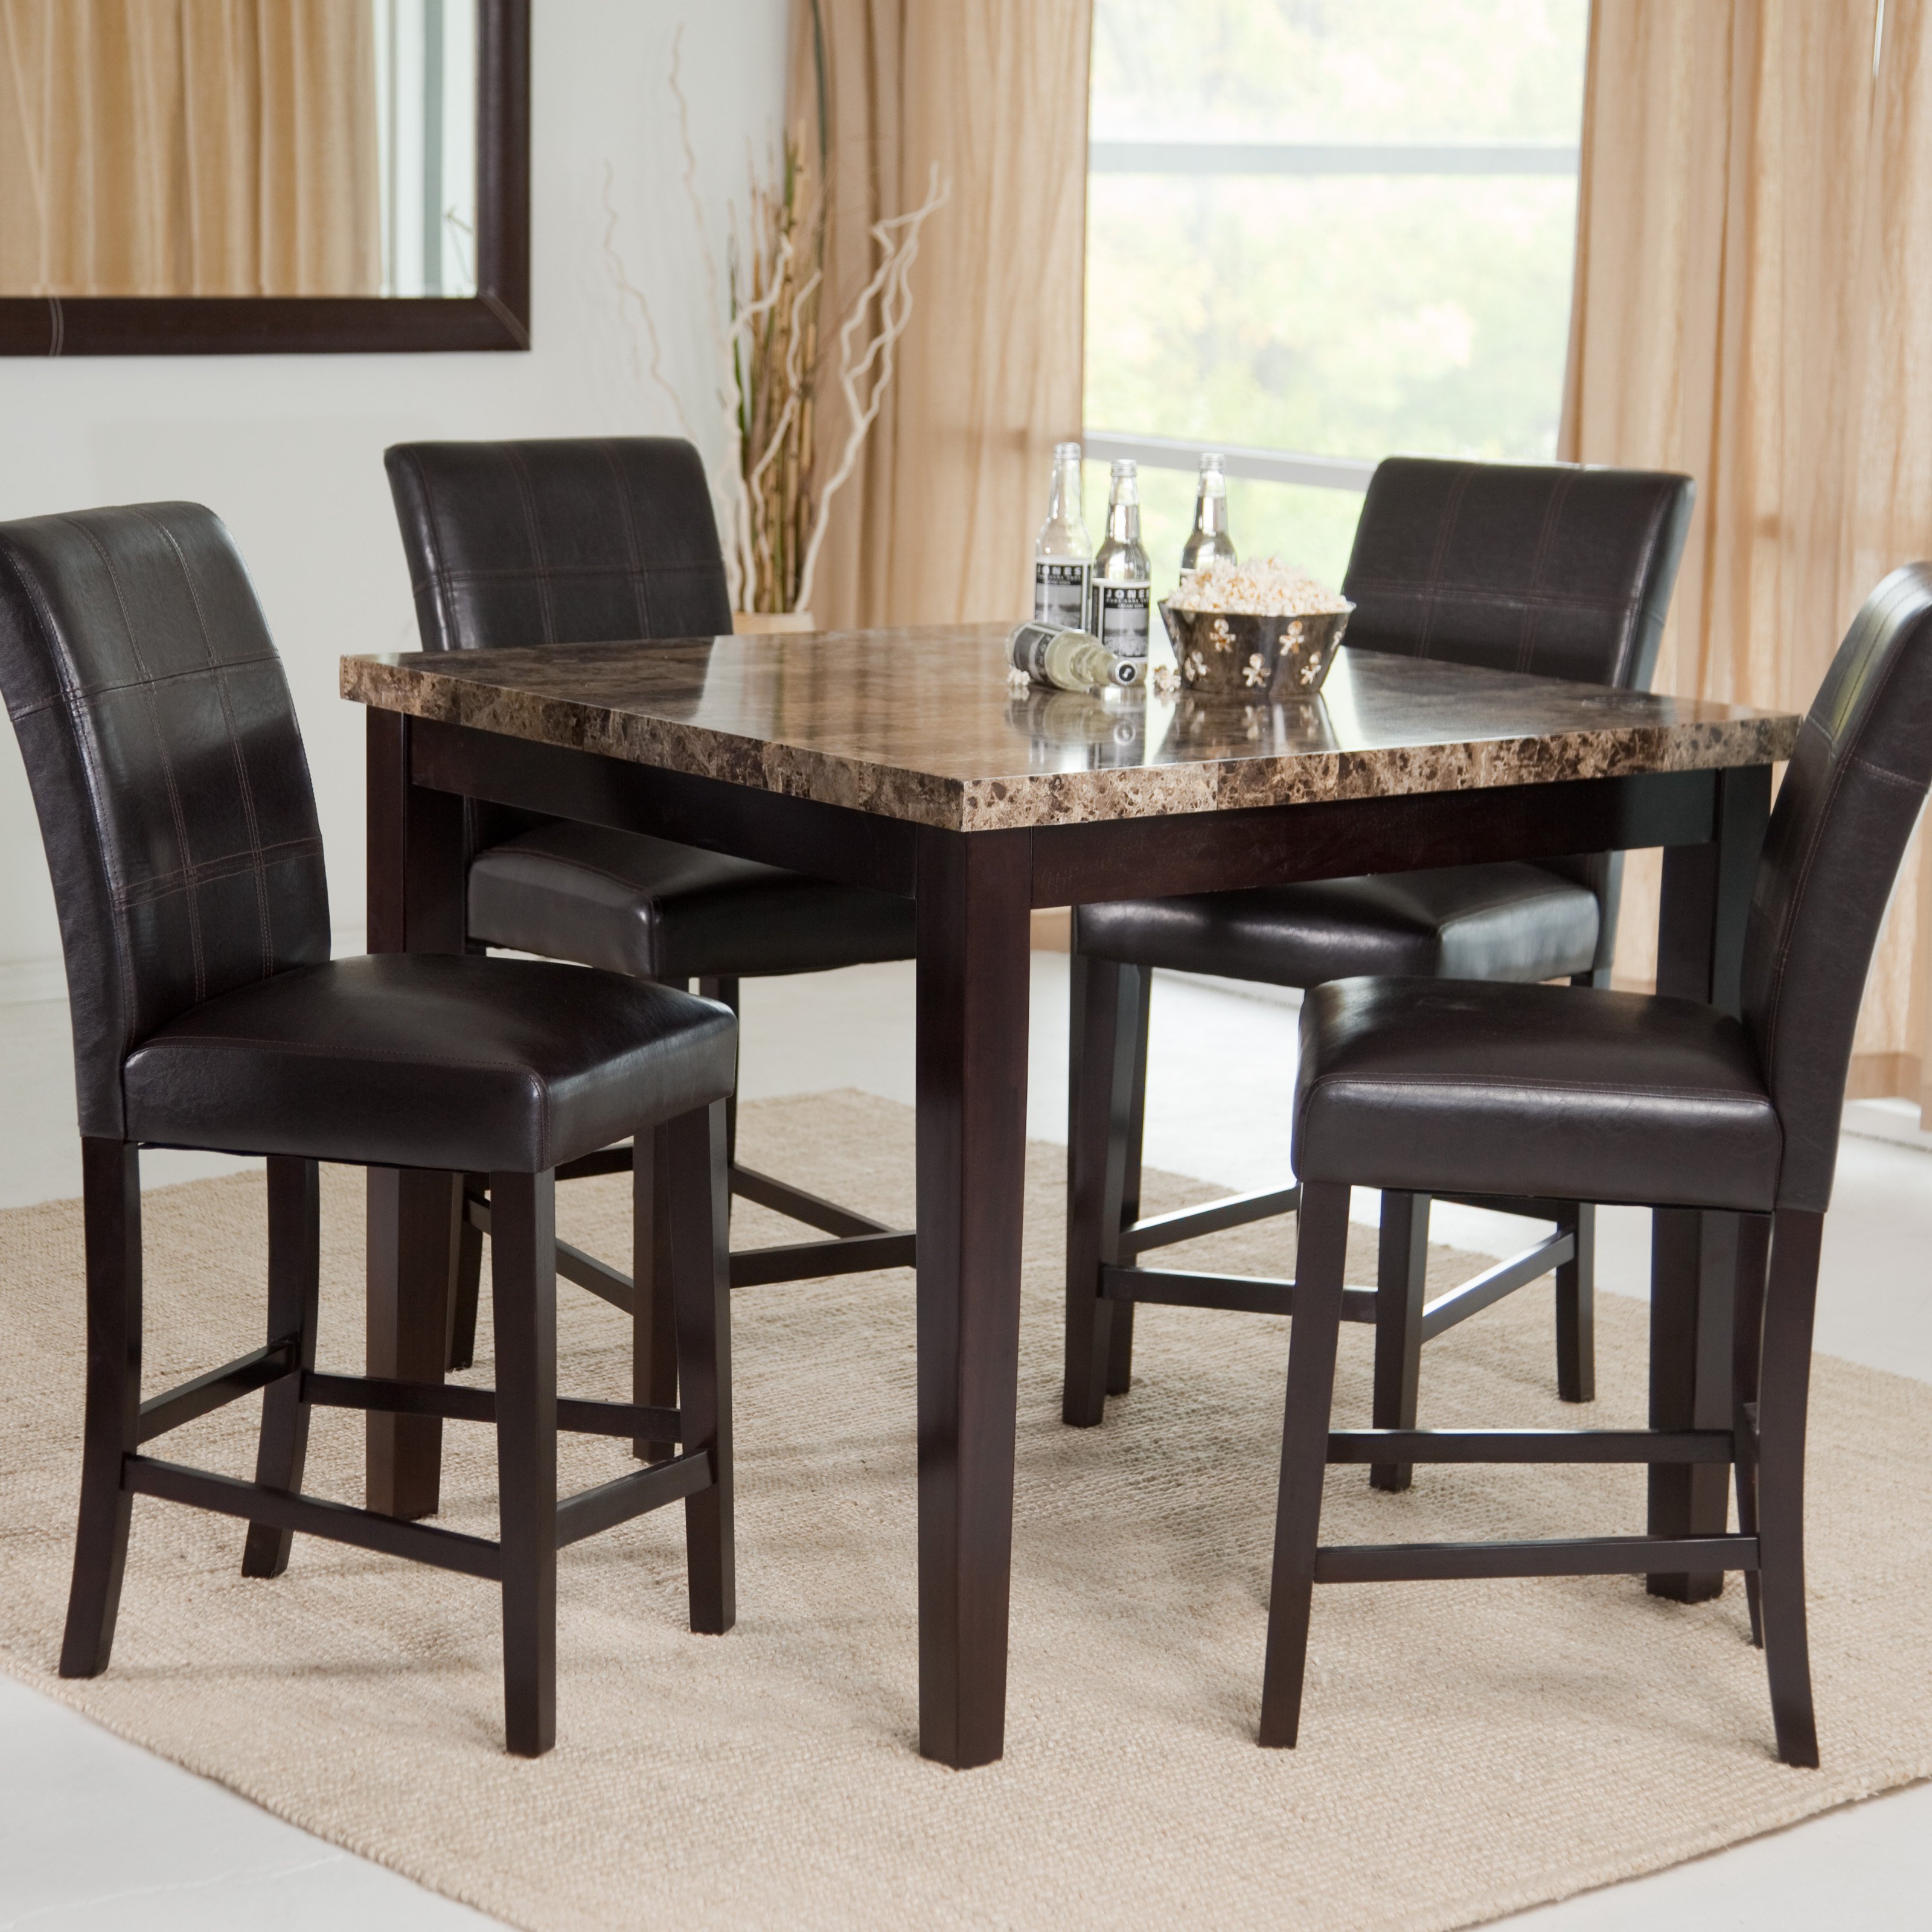 dining table set finley home palazzo 6 piece dining set with bench - dining table sets ZISTQPJ